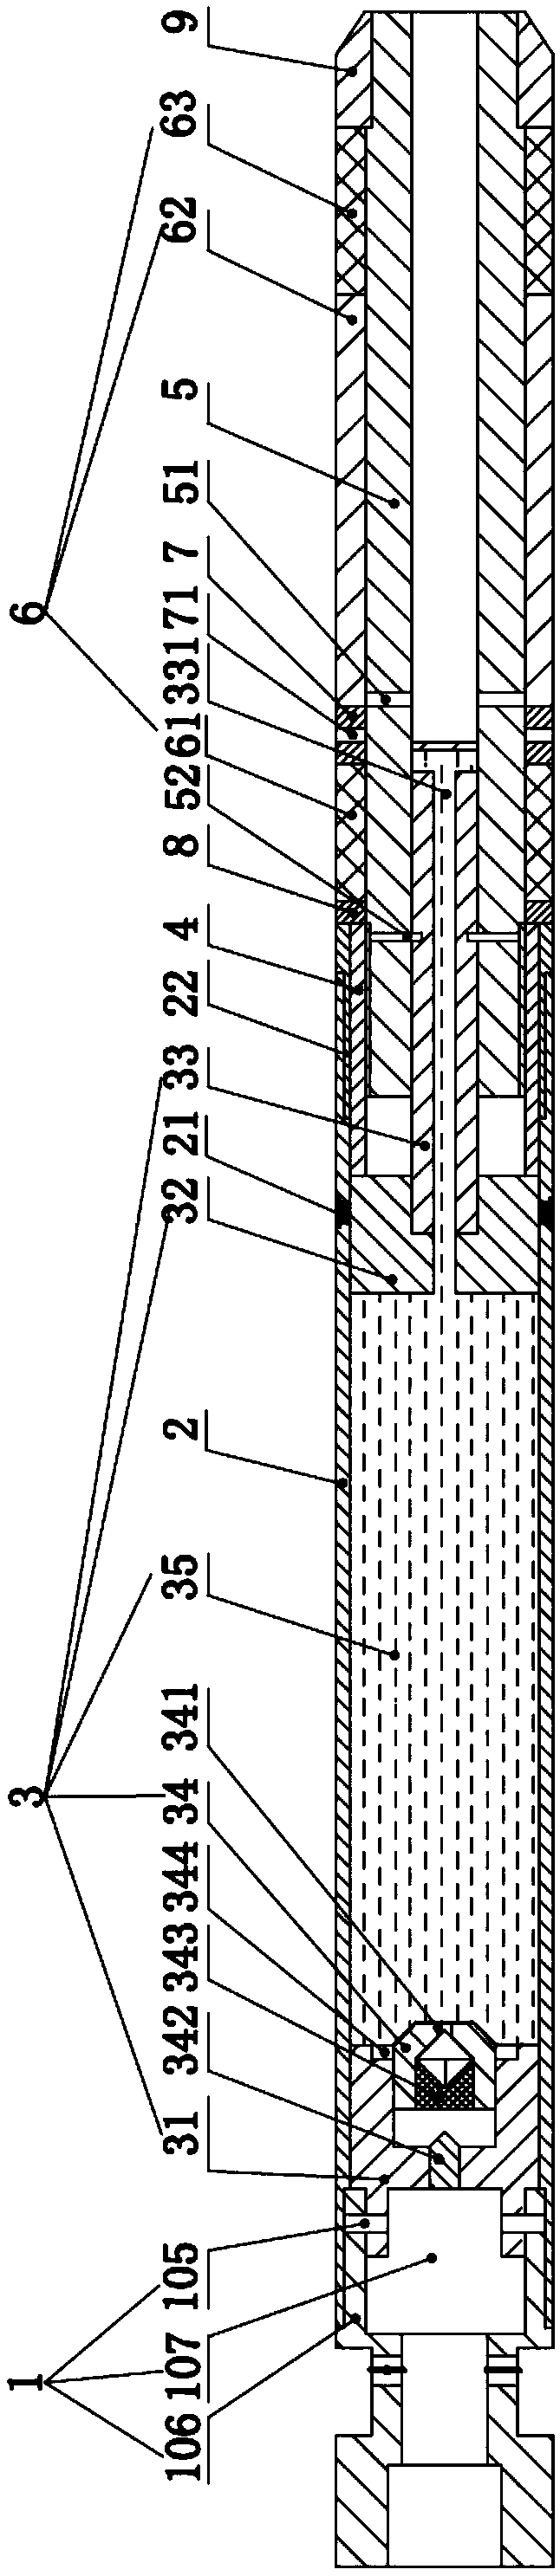 Liquid explosive injection and detonation device for explosion fracturing of oil and gas reservoir